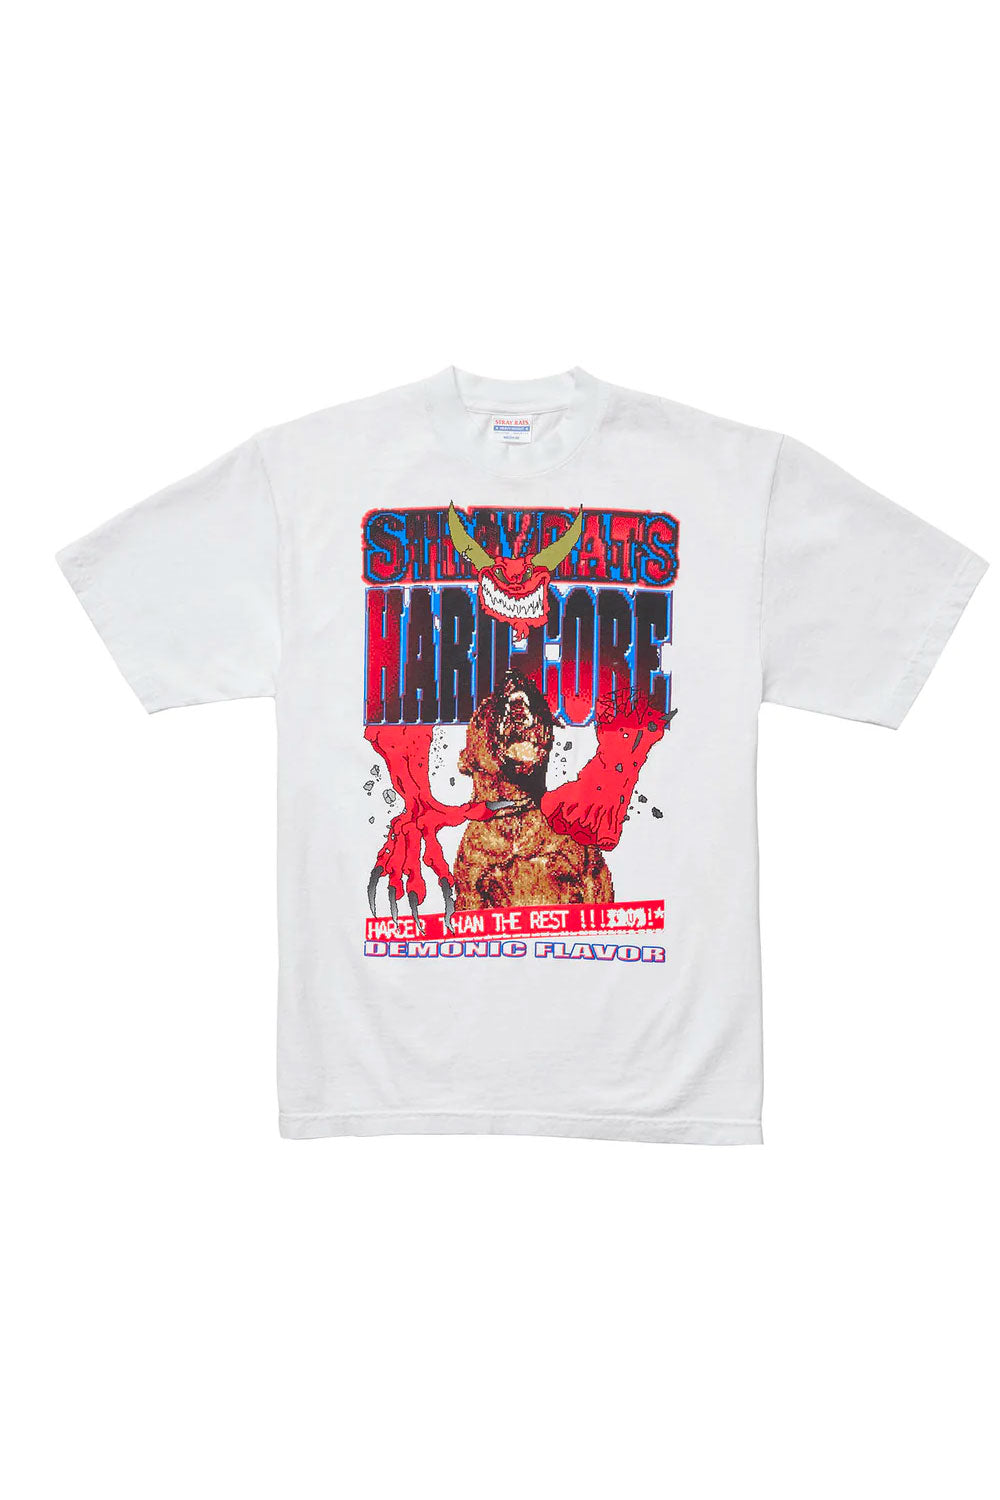 The STRAY RATS - HARD-CORE TEE WHITE available online with global shipping, and in PAM Stores Melbourne and Sydney.